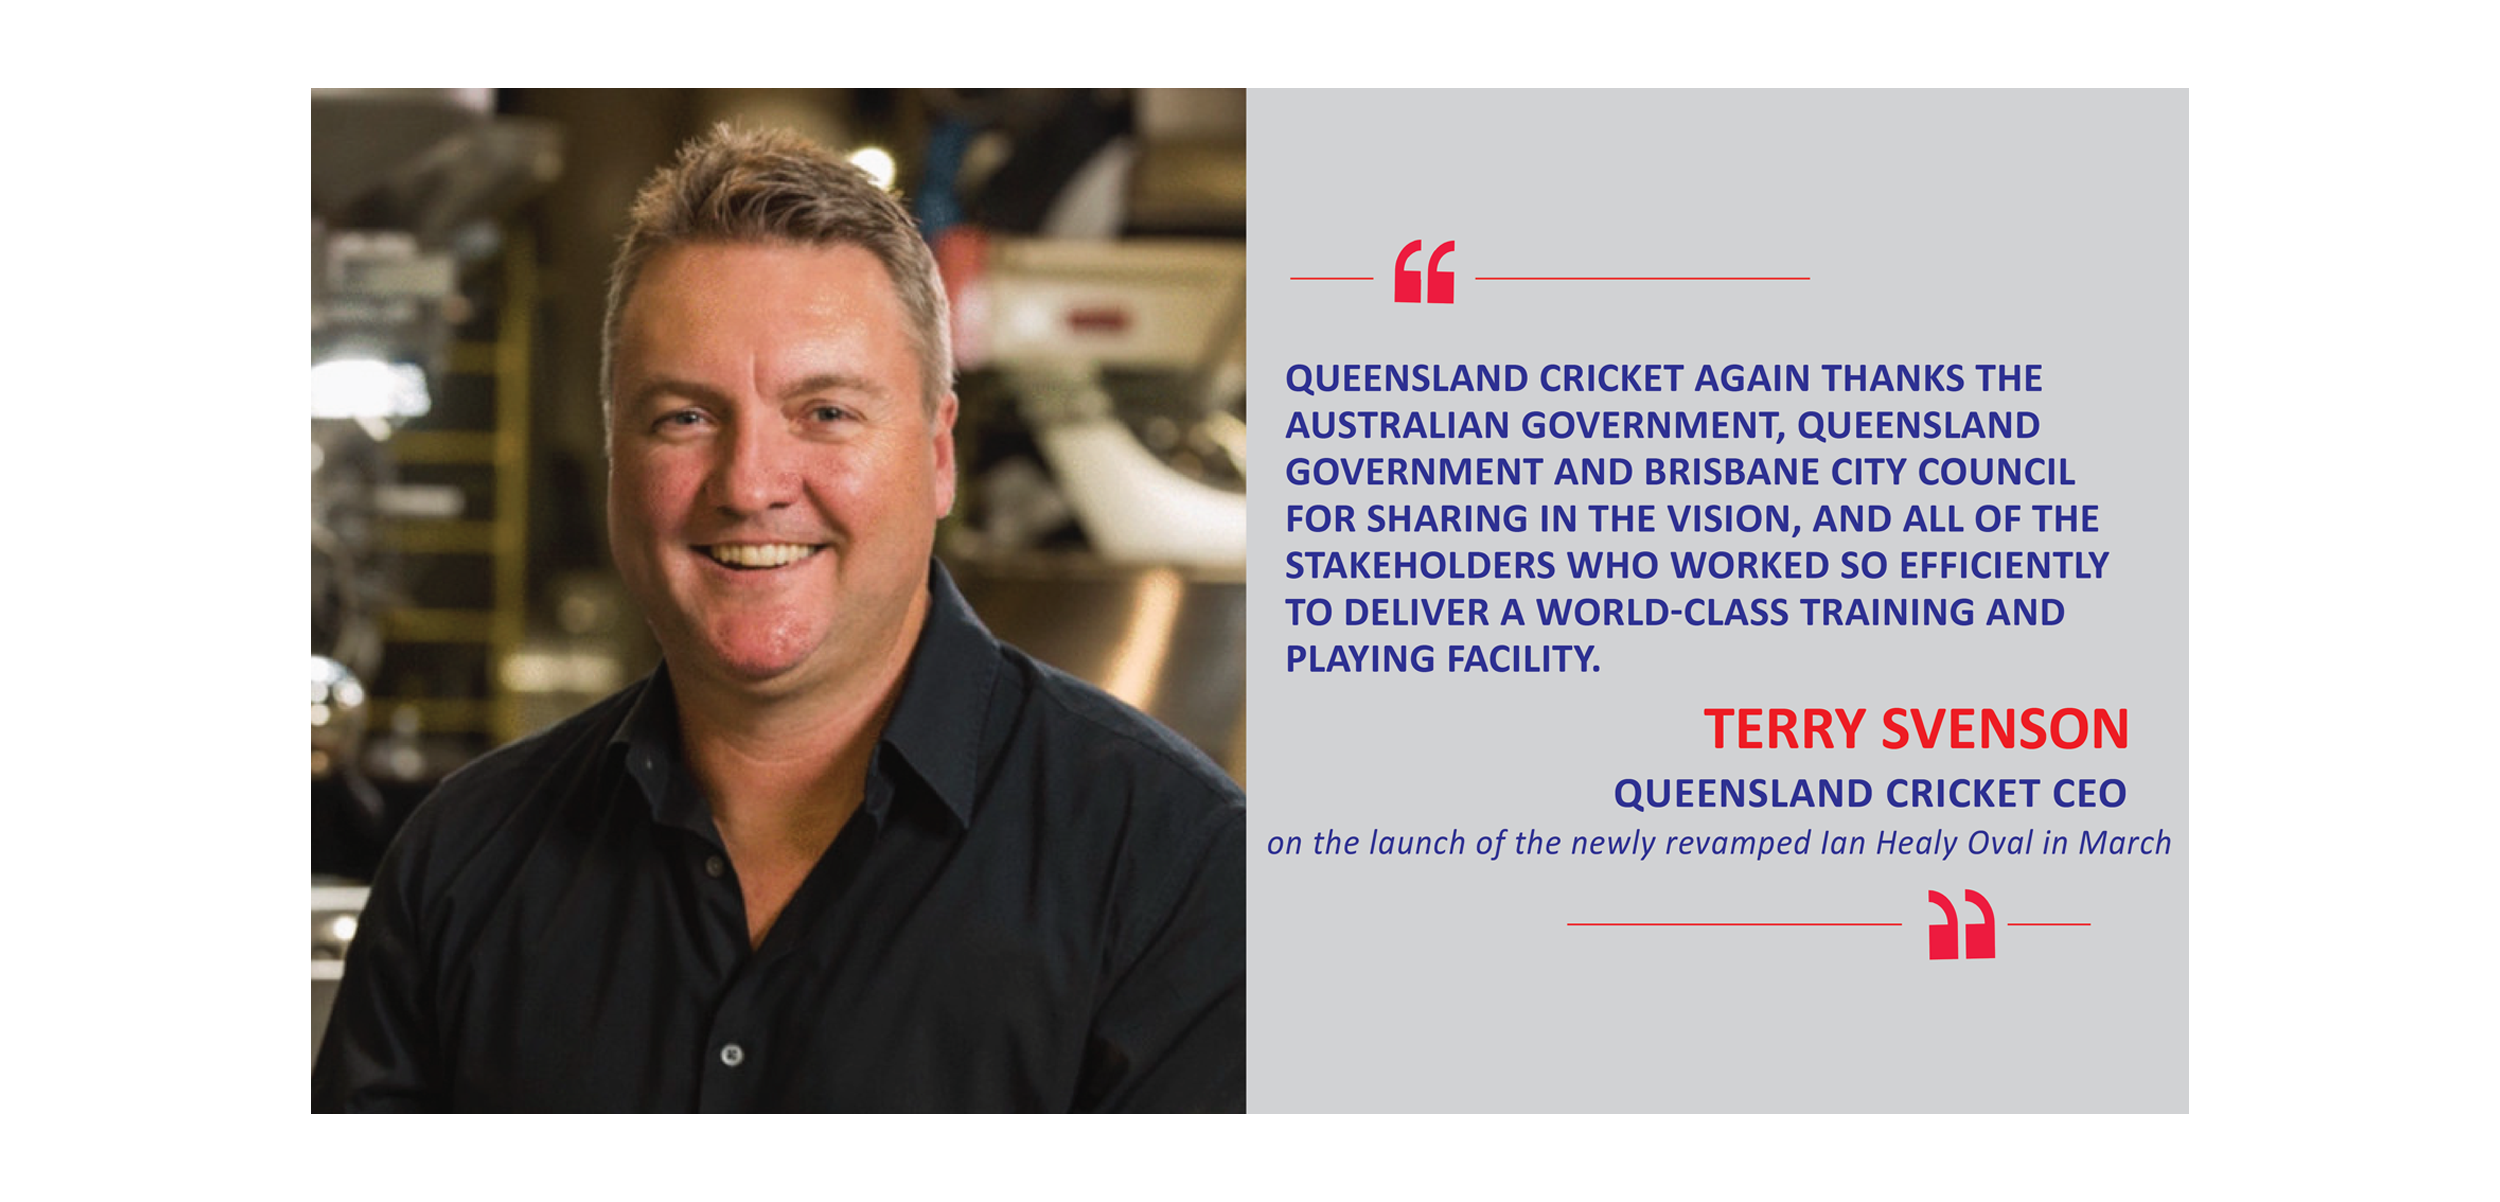 Terry Svenson, Queensland Cricket CEO on the launch of the newly revamped Ian Healy Oval in March